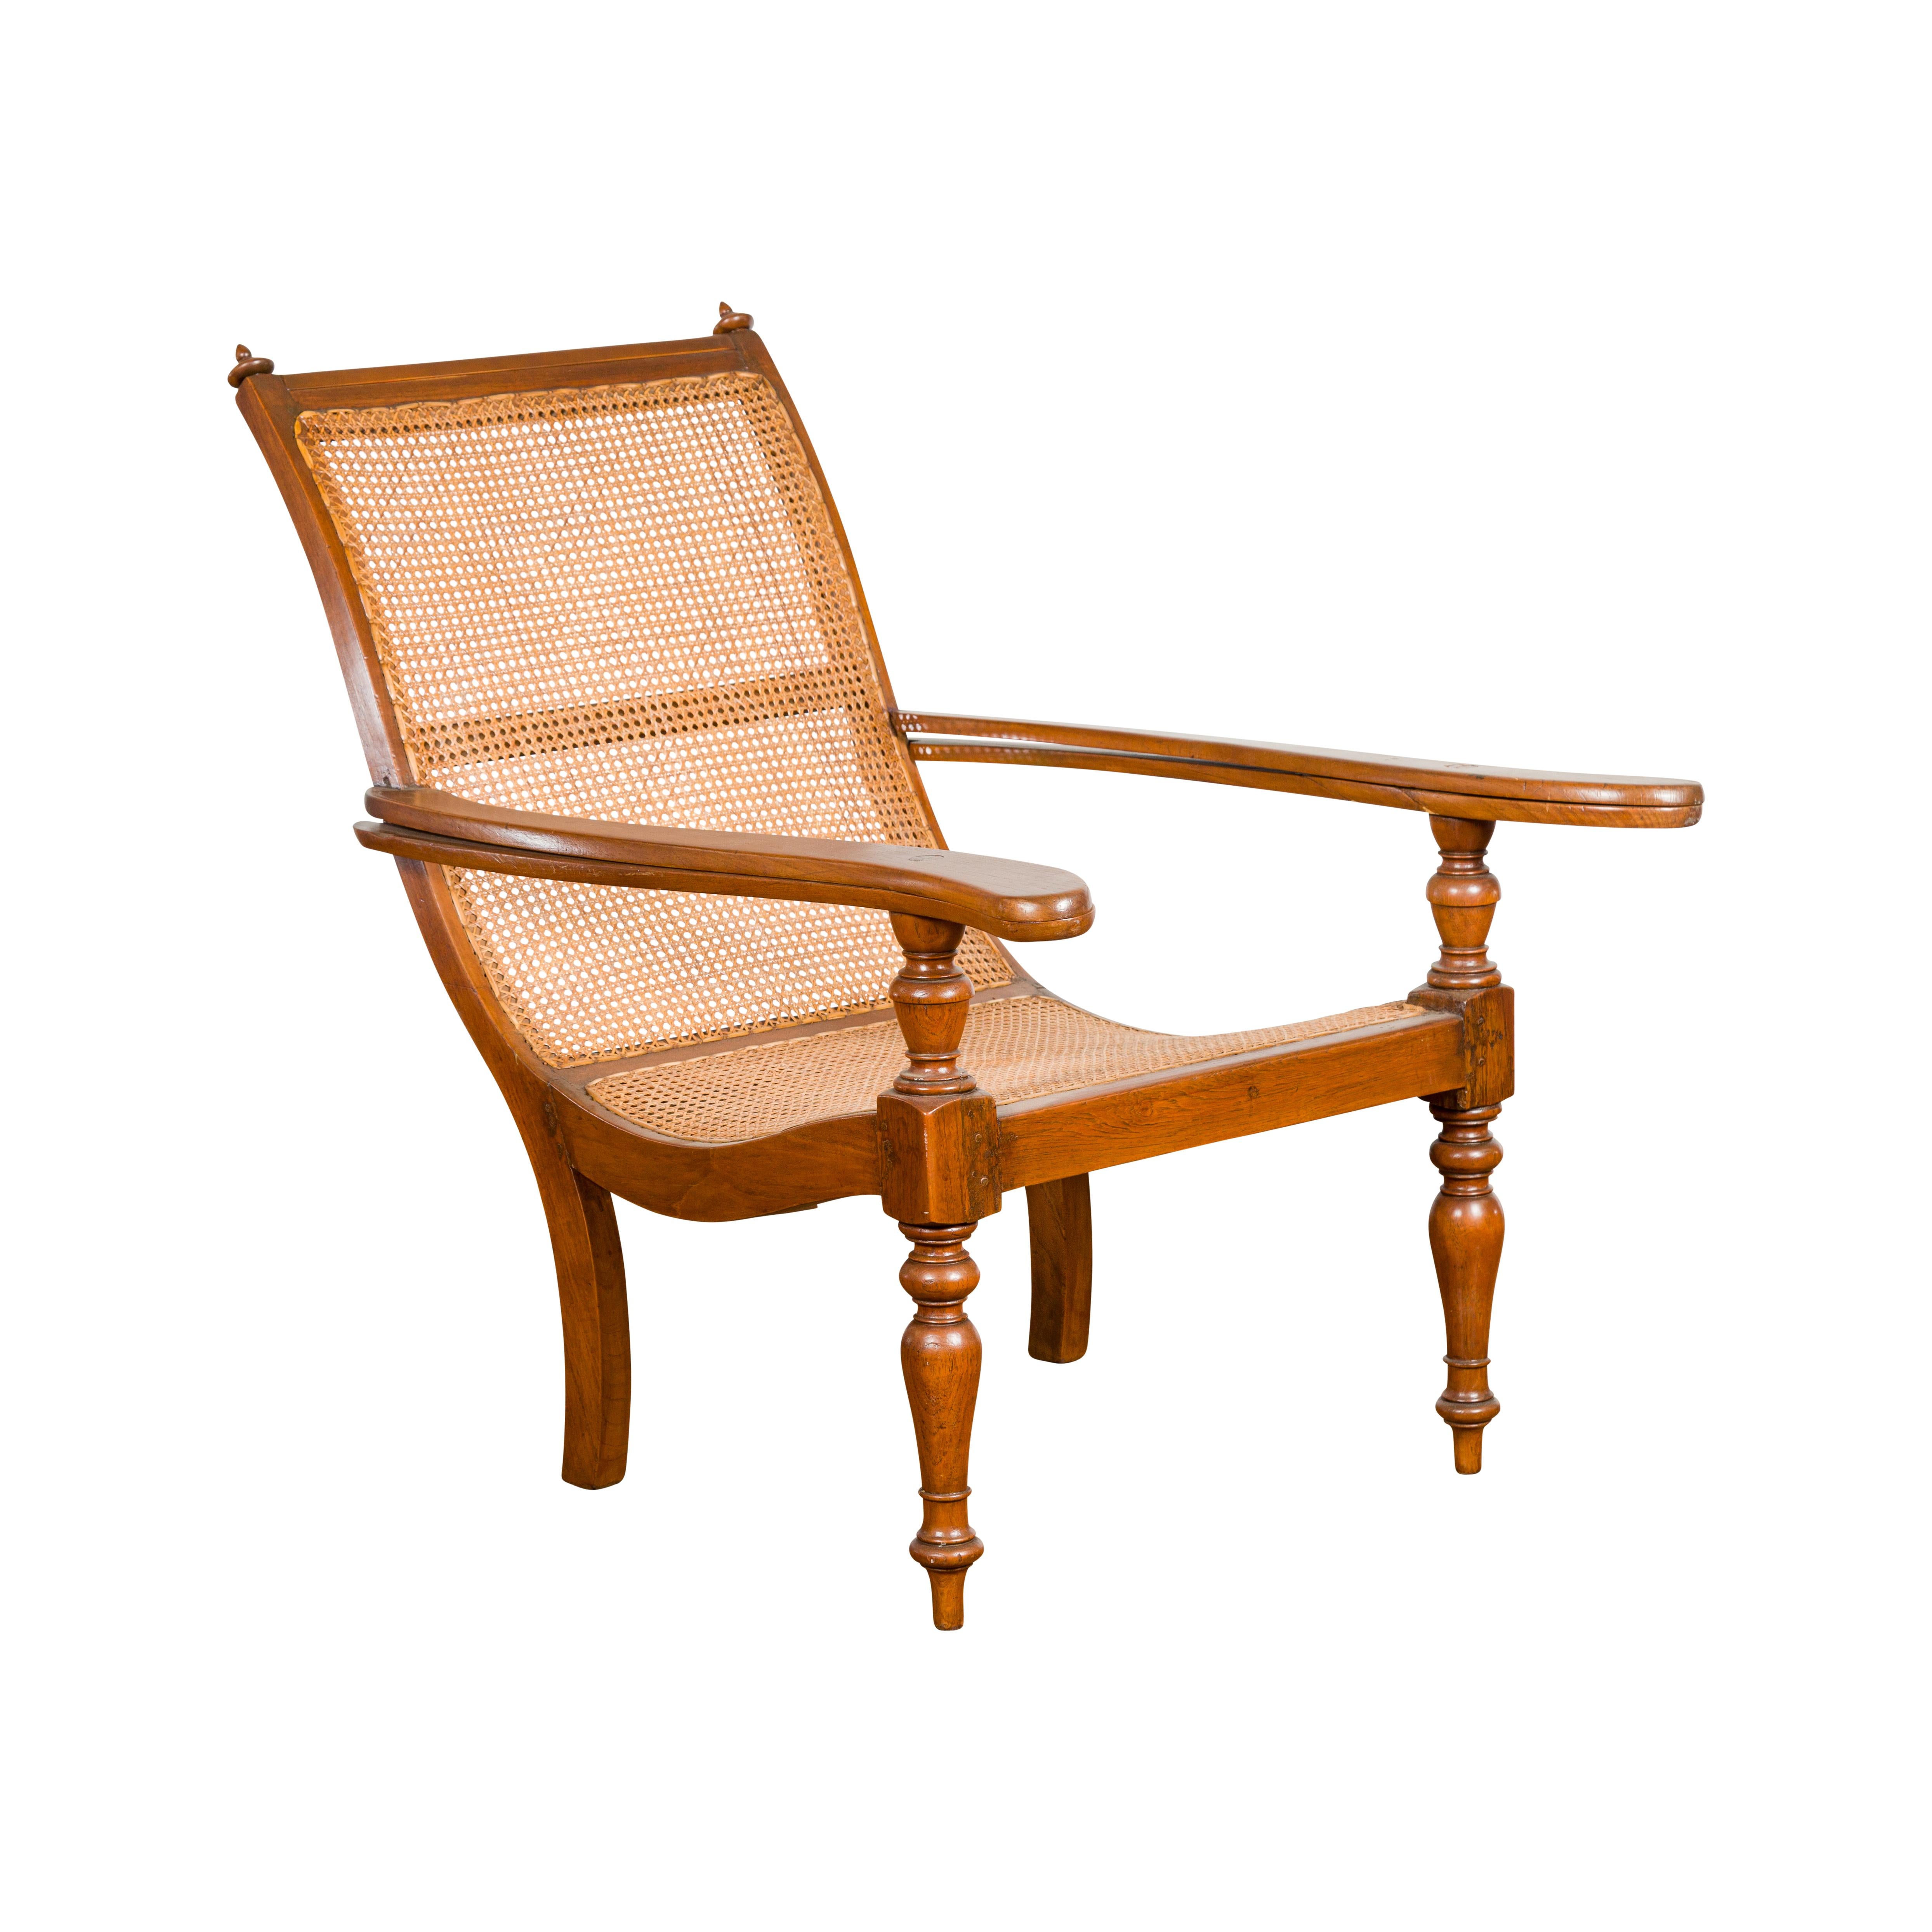 Dutch Colonial Period Wood and Rattan Lounge Chair with Extending Arms For Sale 3